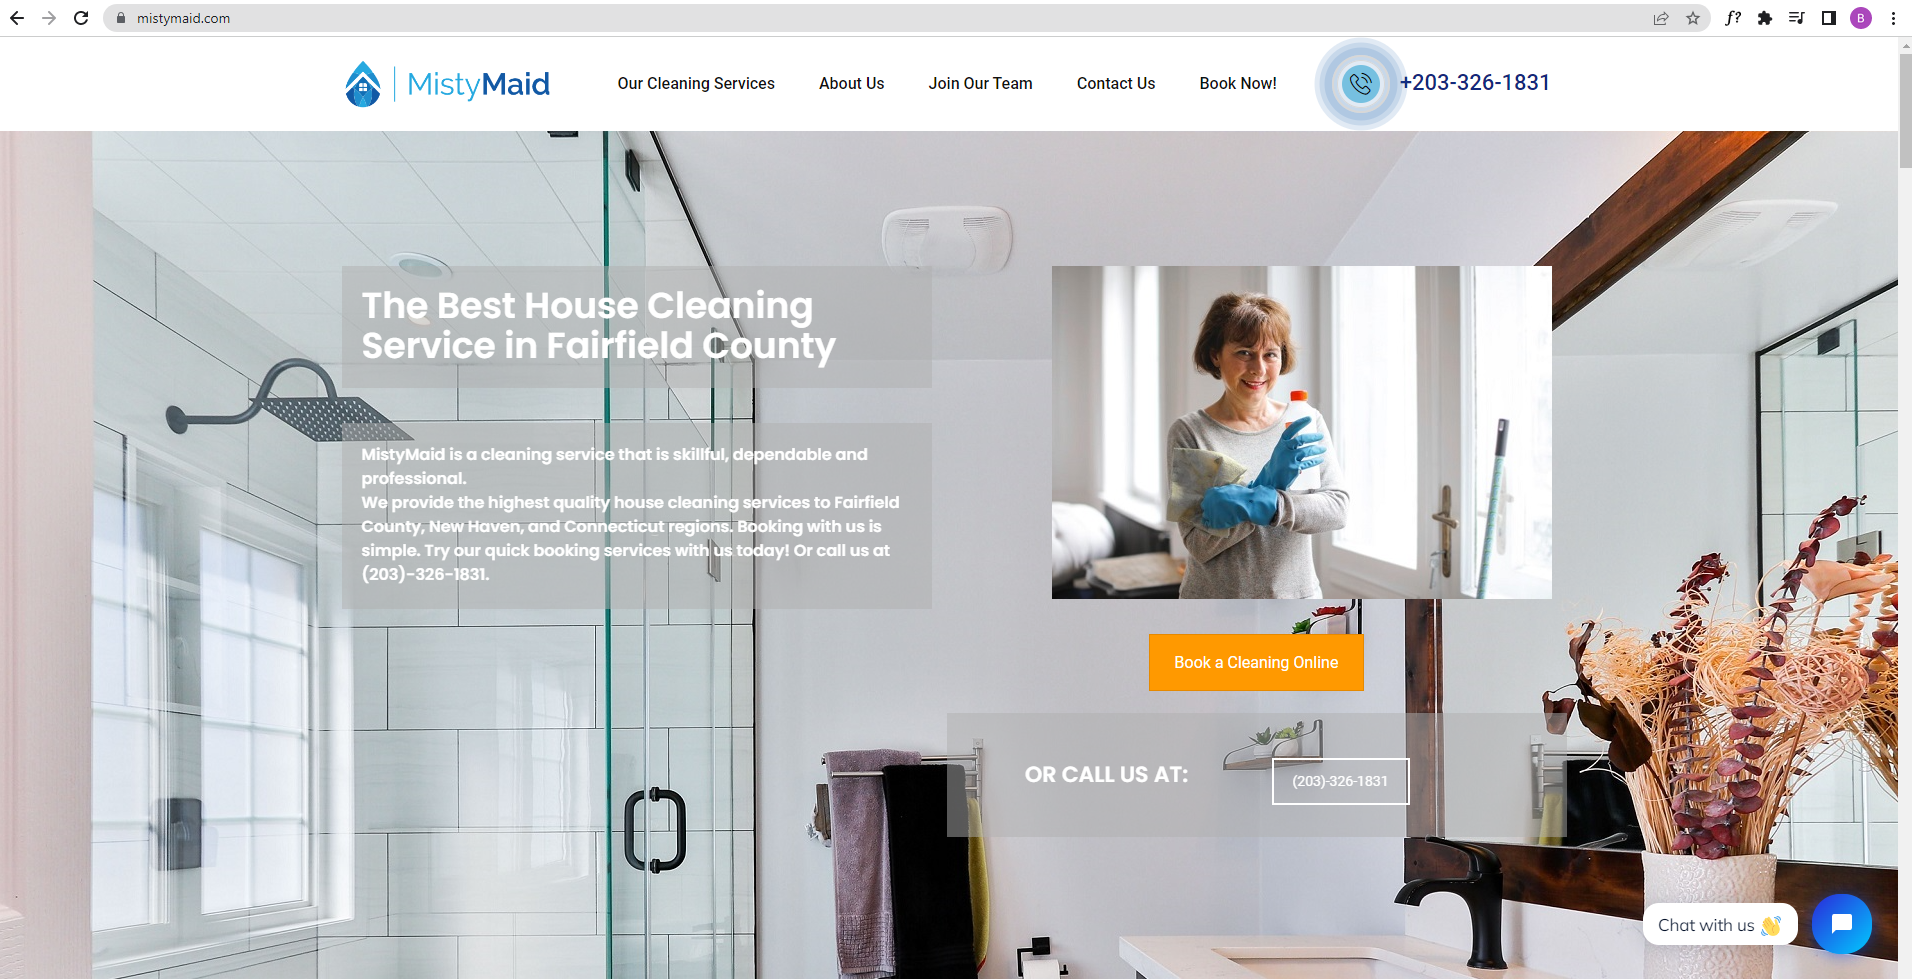 A Top Notch Home Cleaning Service To Trust